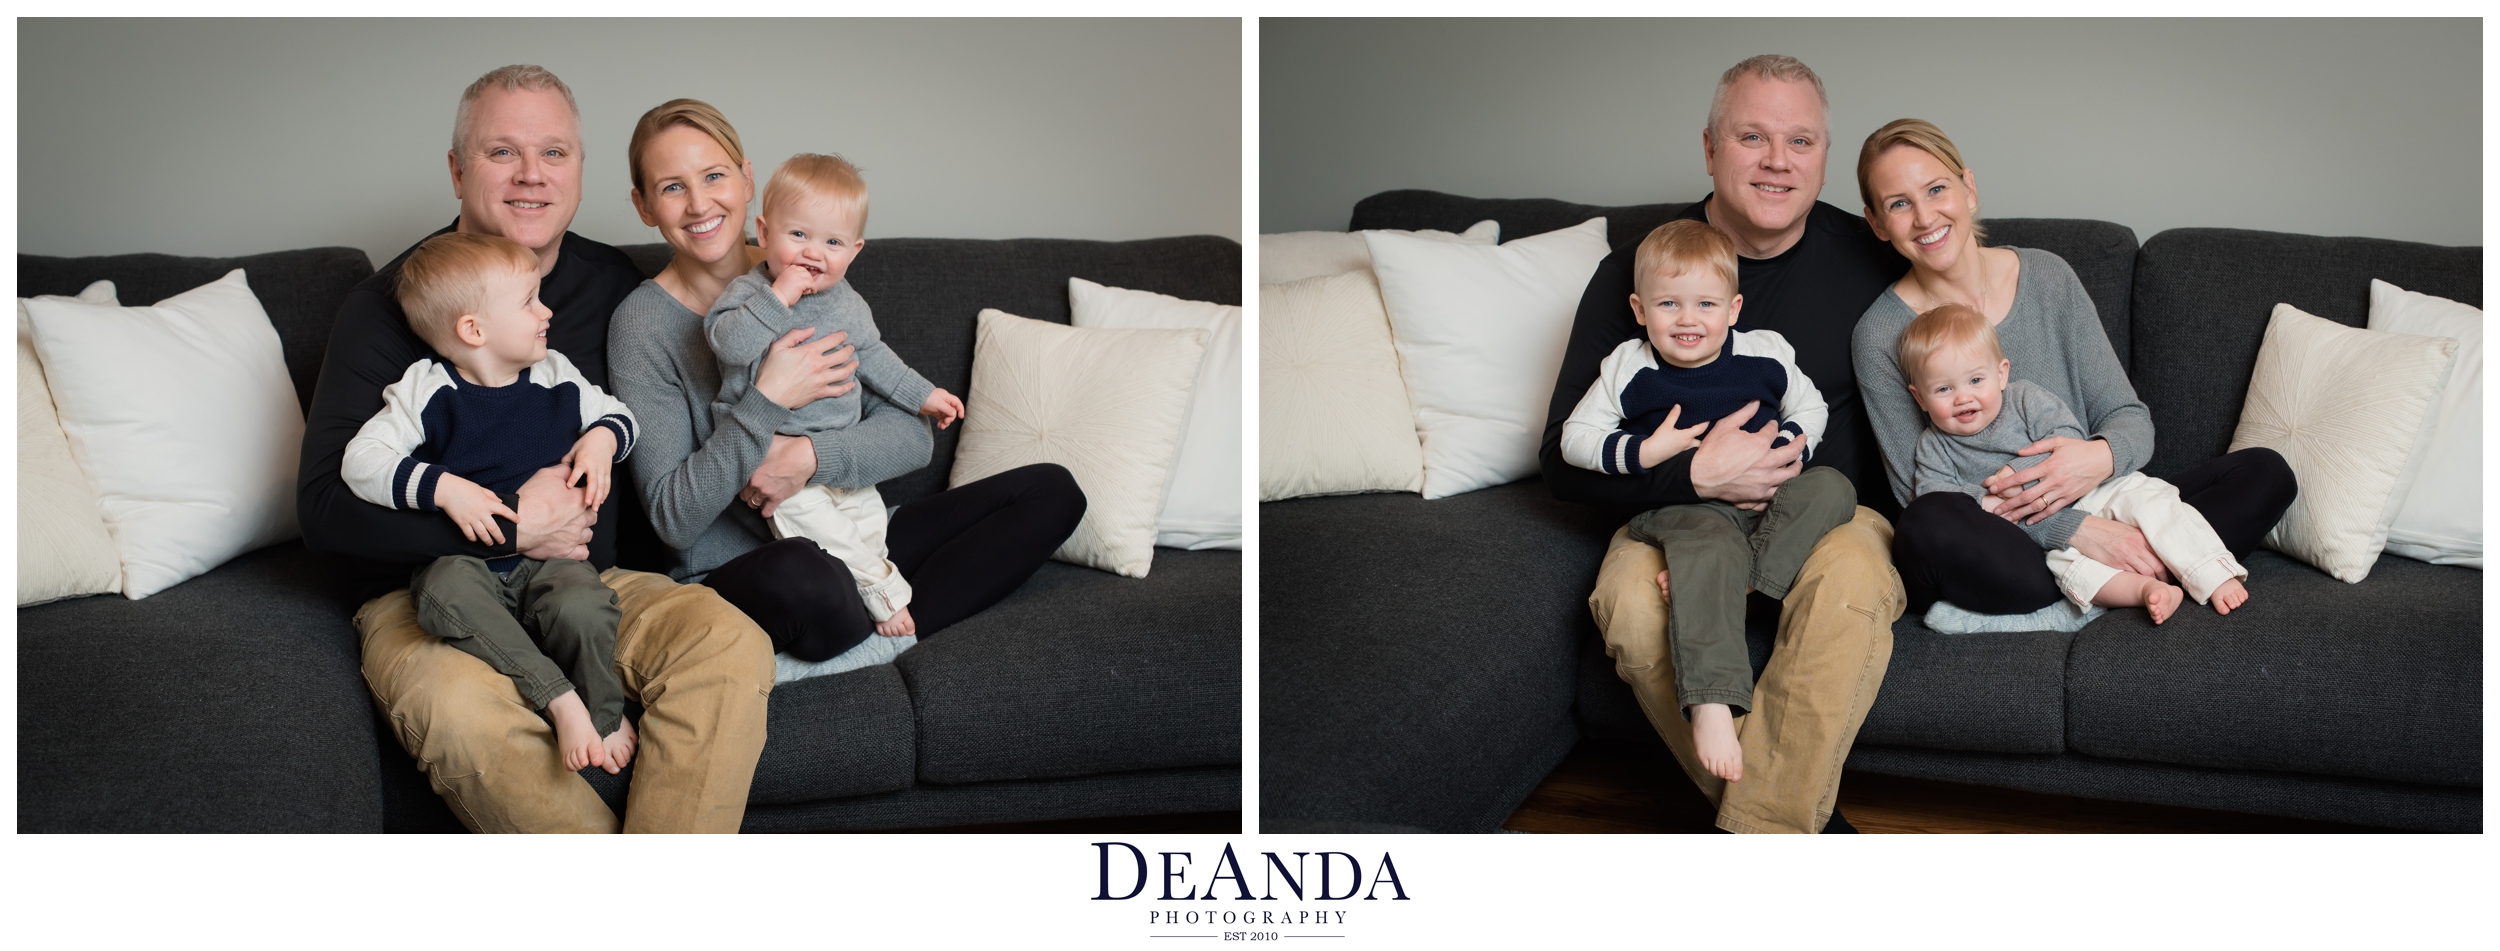 1 year old lifestyle portraits in home with family